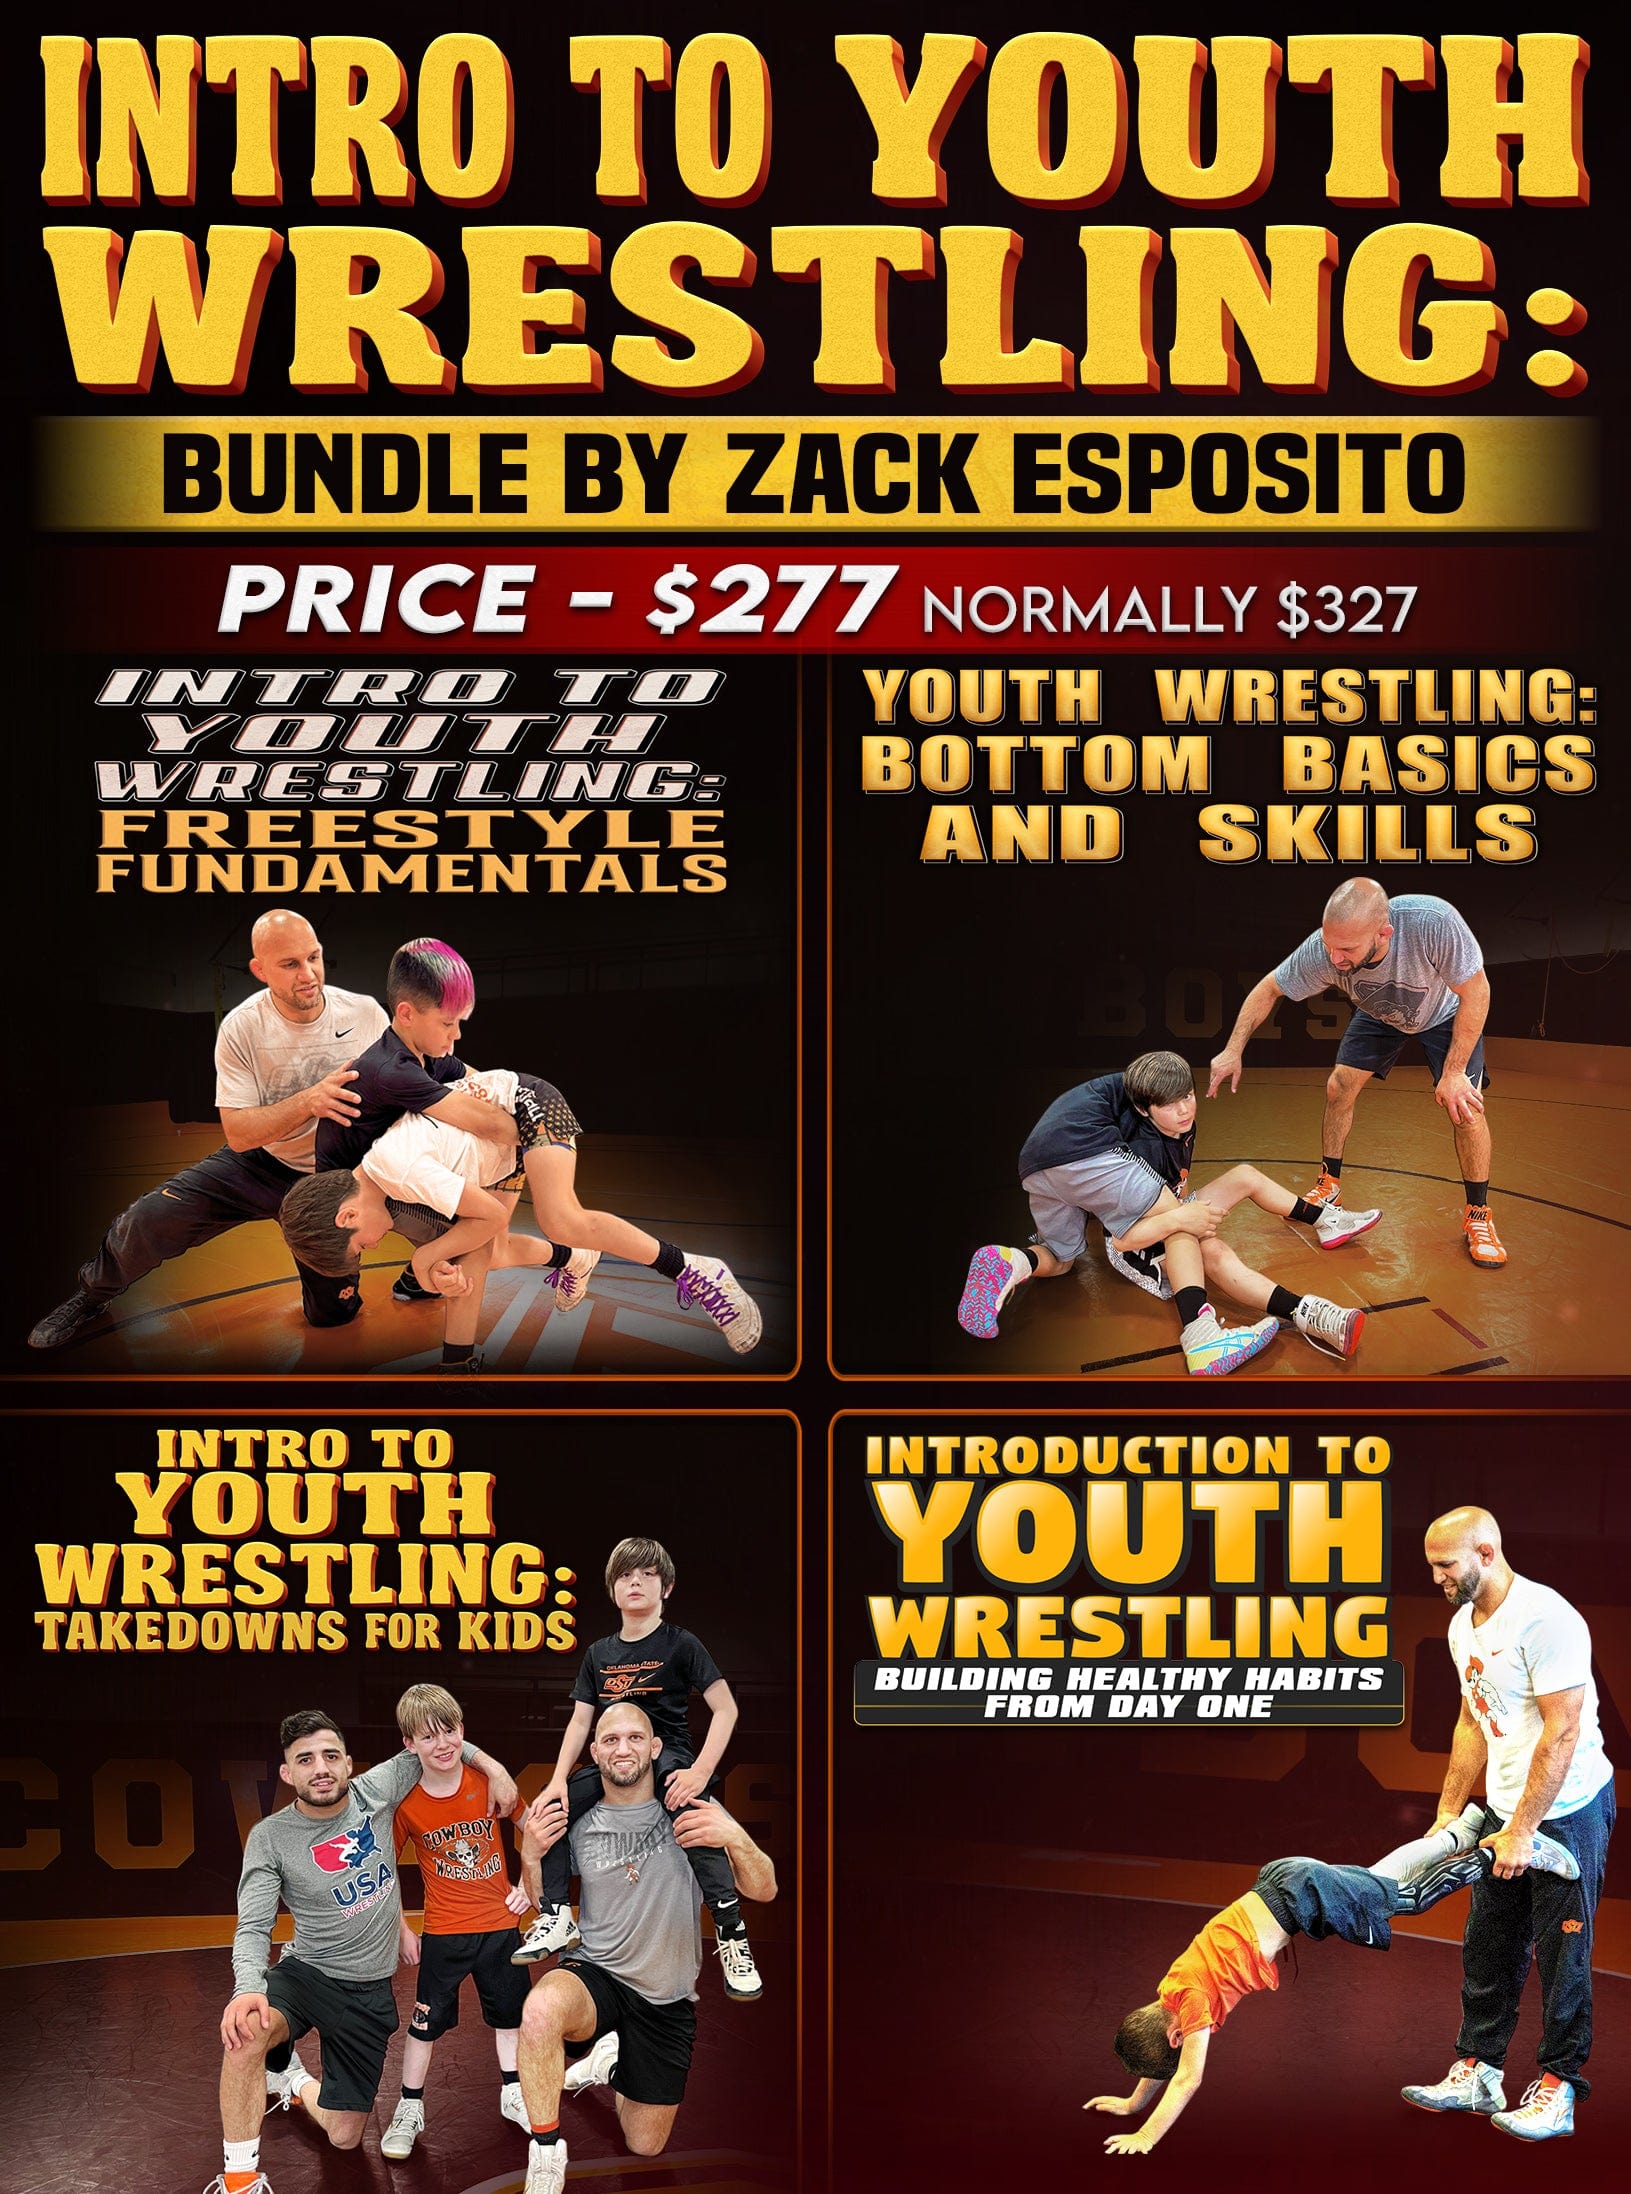 Complete Guide To Youth Wrestling Bundle by Zack Esposito - Fanatic Wrestling